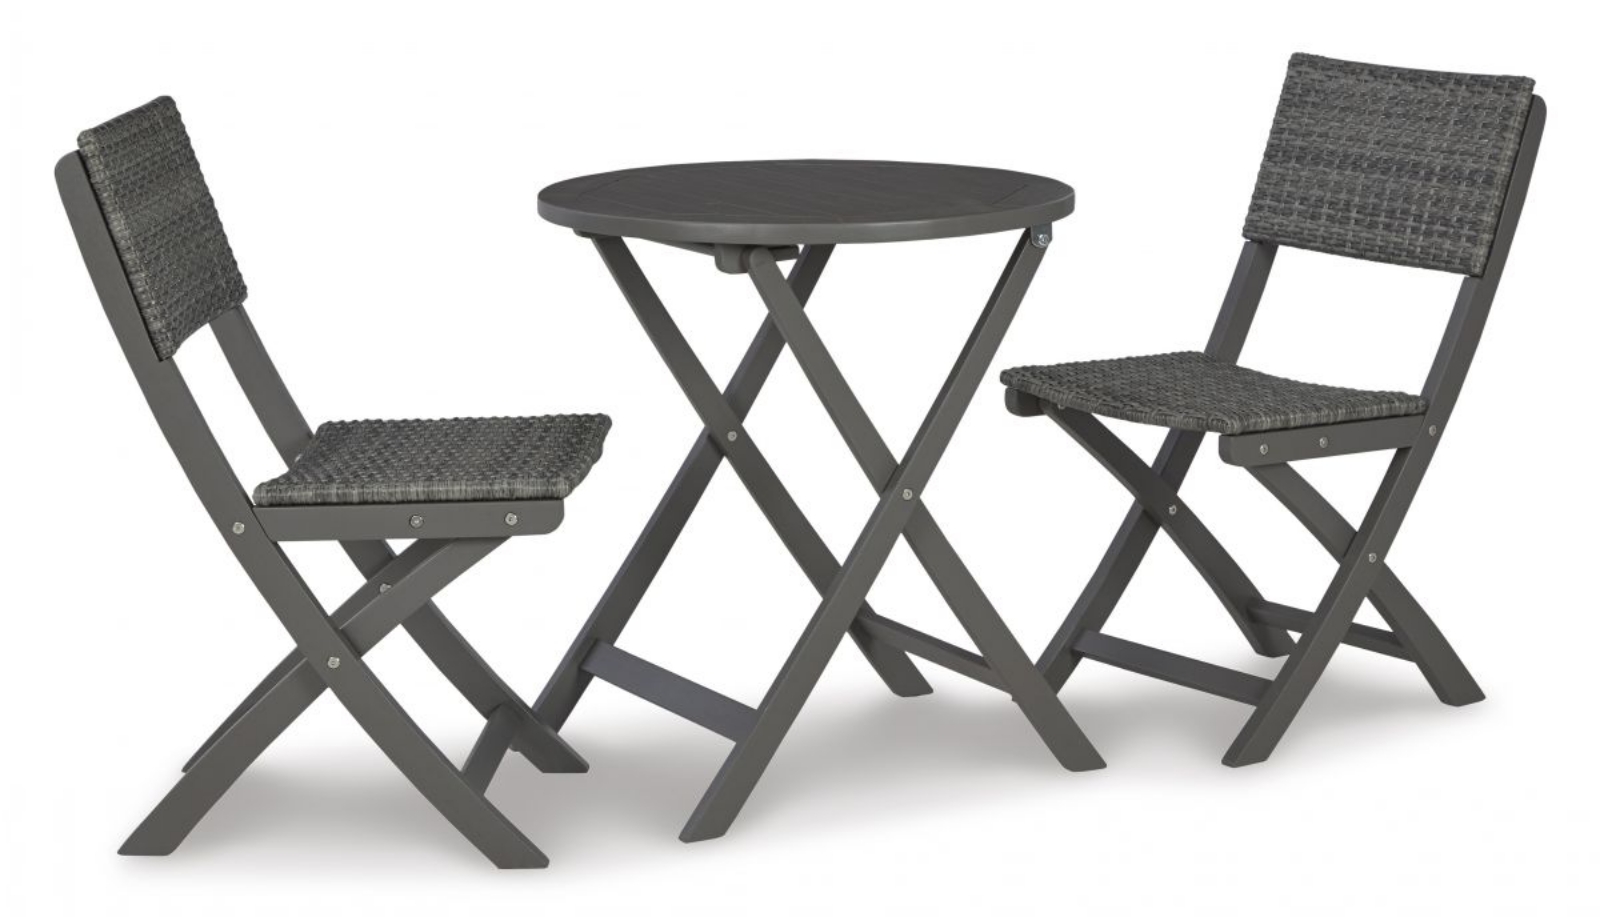 Picture of Safari Peak Outdoor Dining Table & 2 Chairs